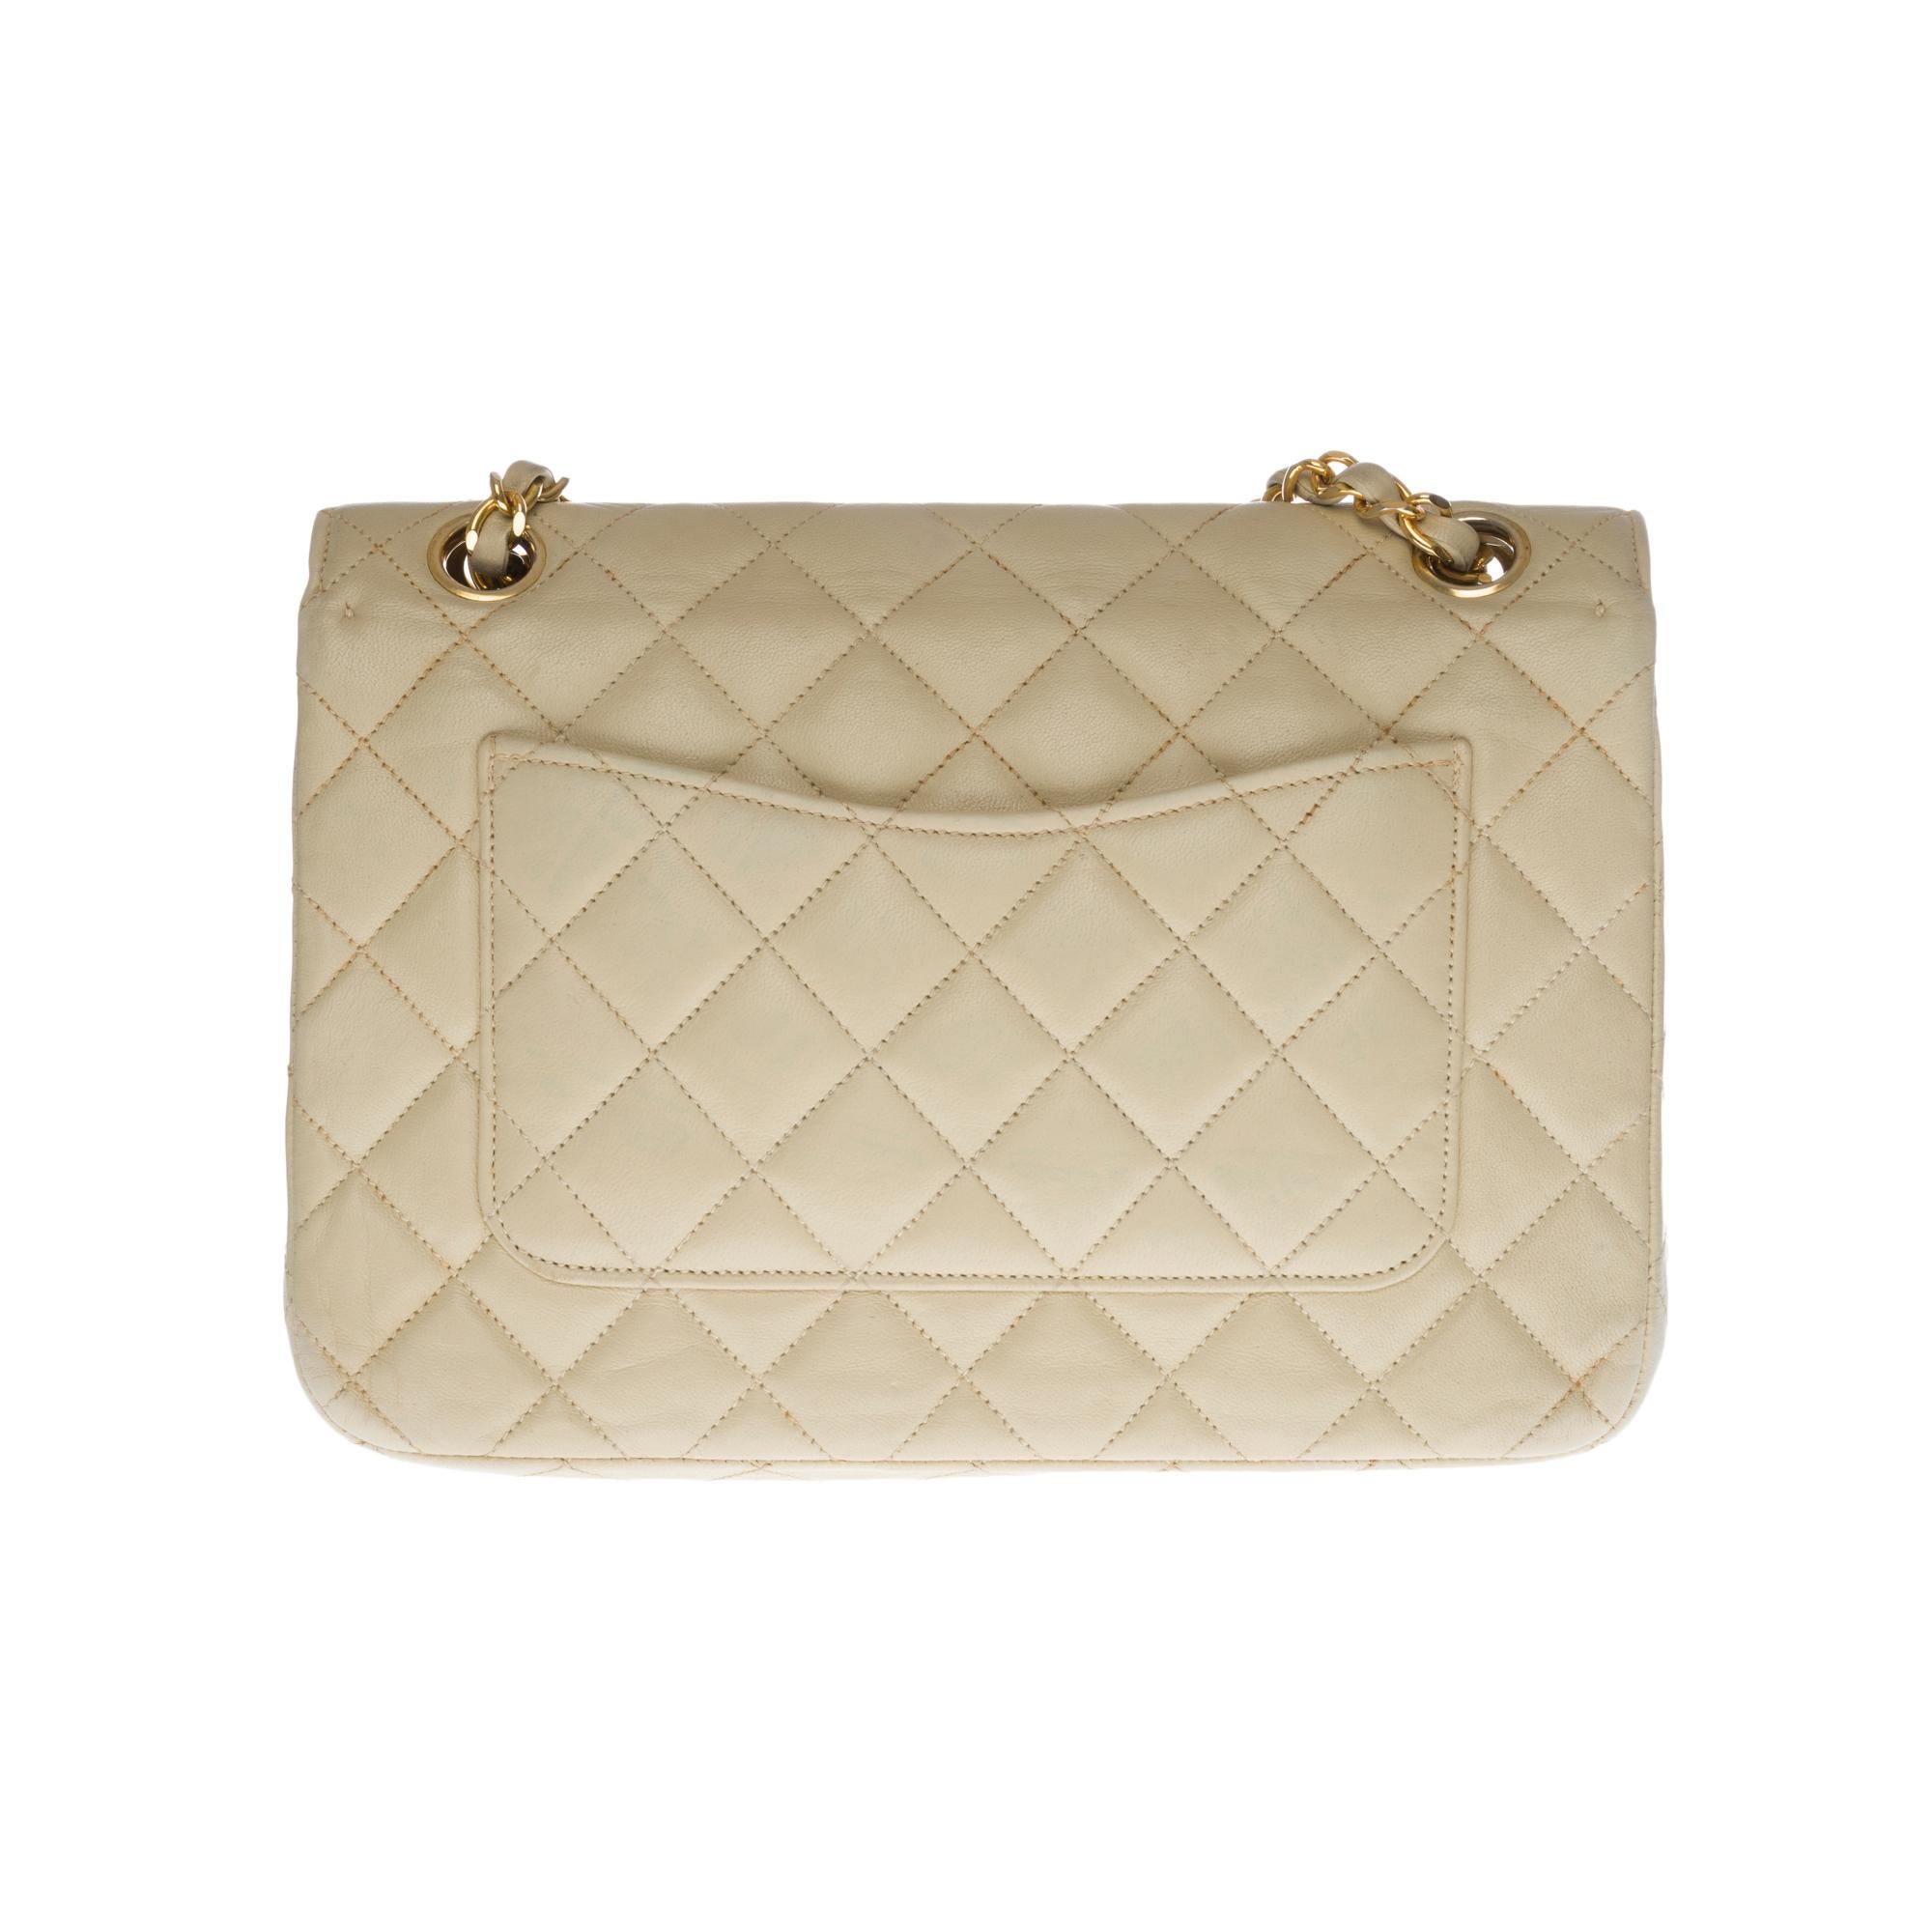 Lovely Chanel Classic full flap bag in beige quilted lambskin (egg shell), gold-tone metal hardware, gold-tone metal chain interwoven with beige leather
1 patch pocket at back
Flap closure, gold-tone CC logo clasp
Lining in beige leather, 1 double